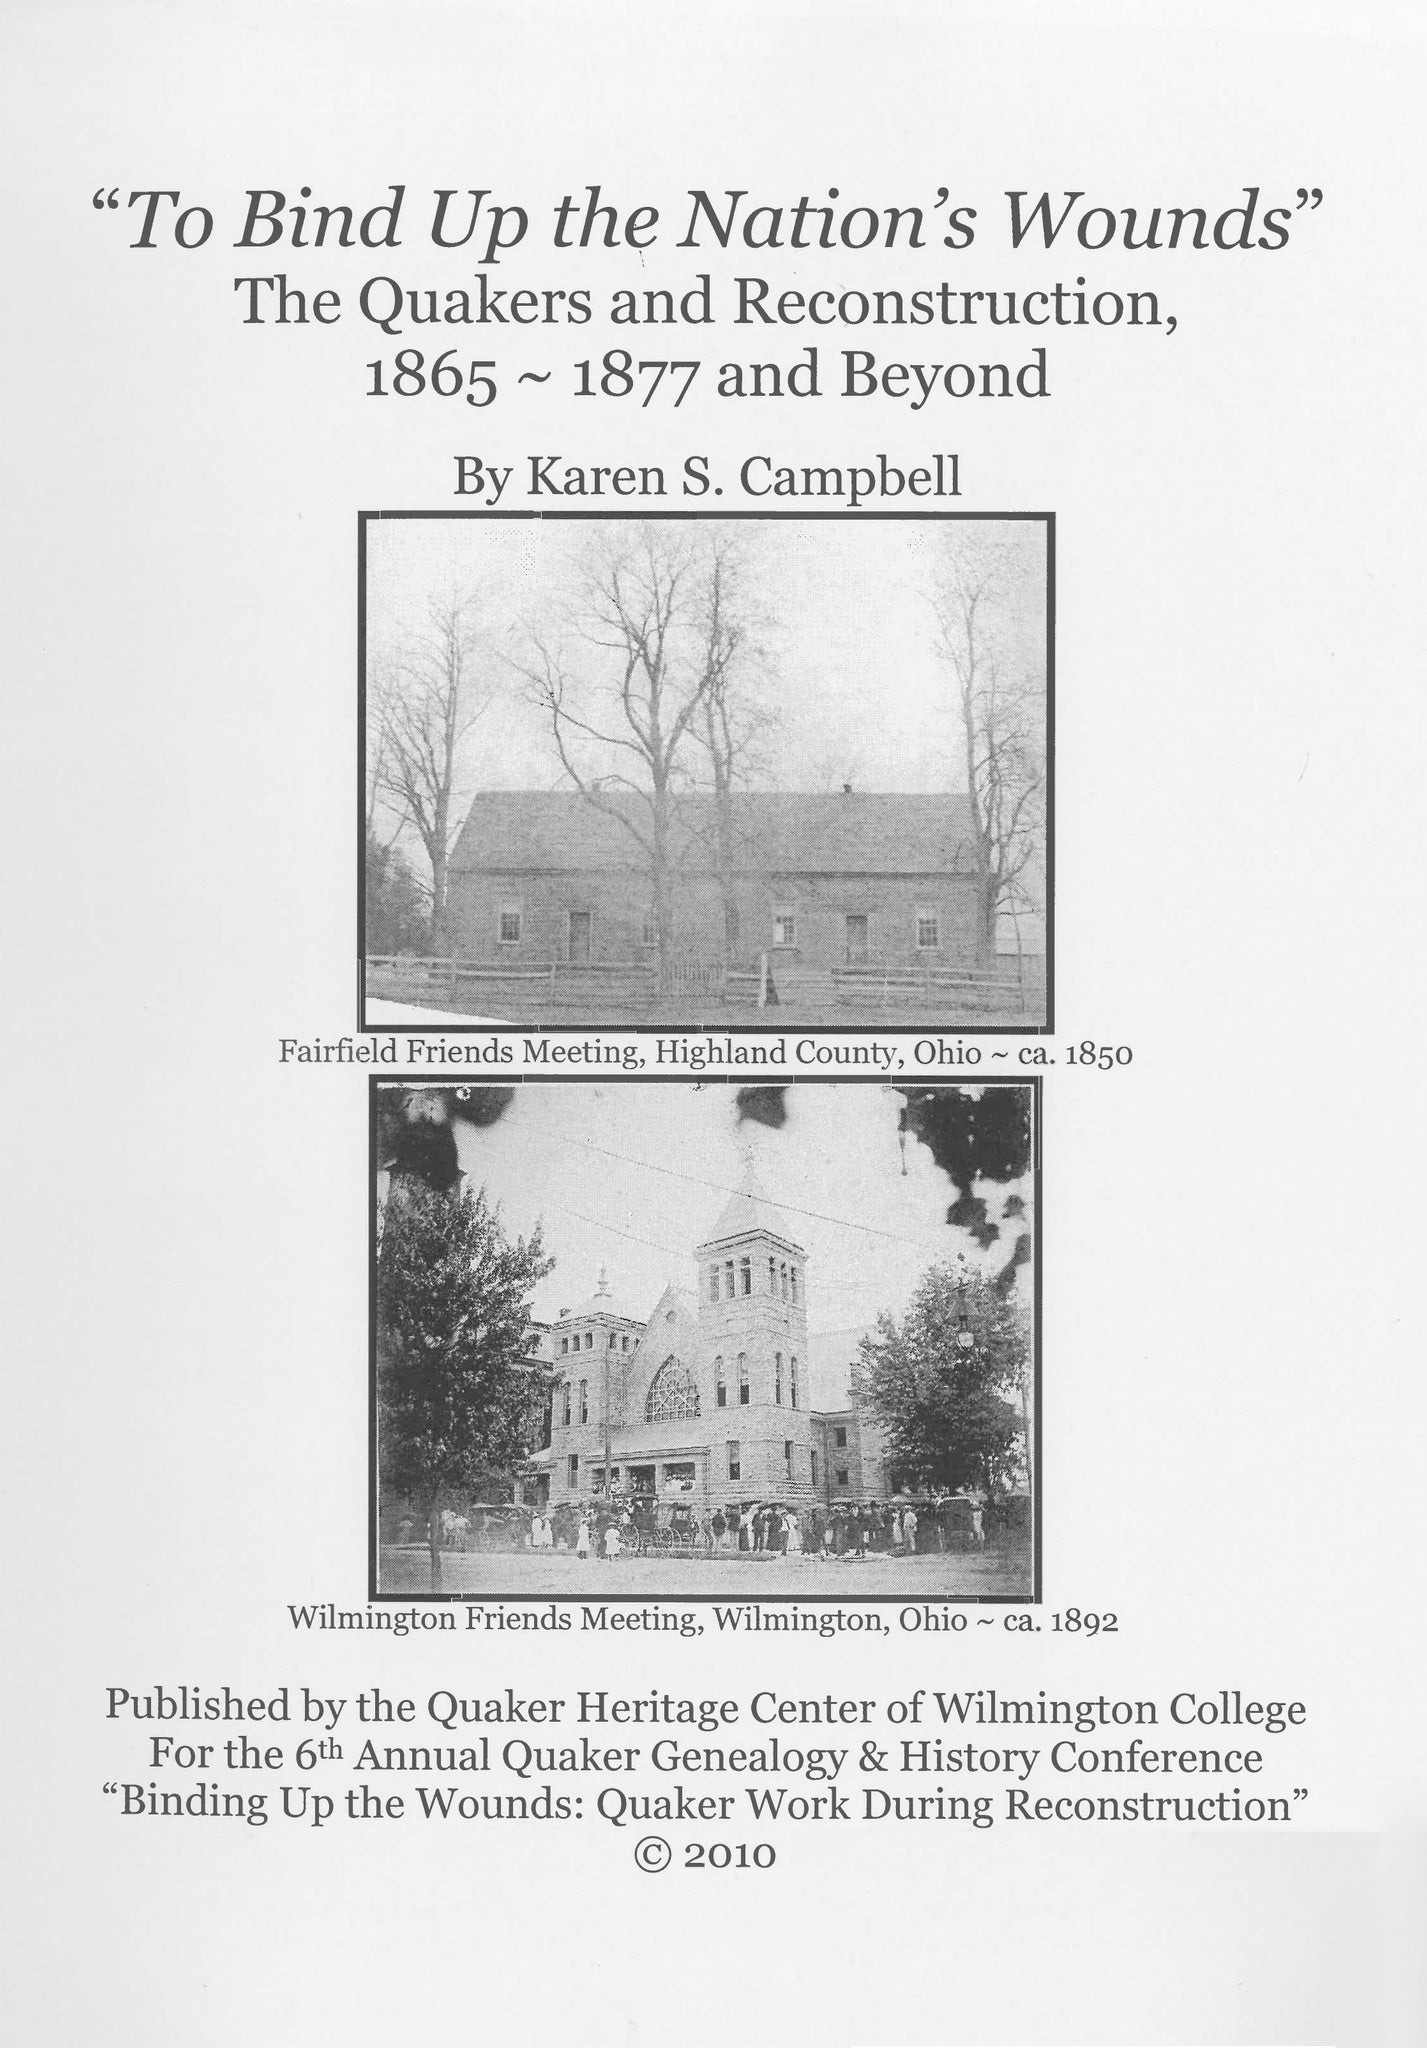 To Bind Up the Nation's Wounds: Quakers and Reconstruction 1865-1877 and Beyond